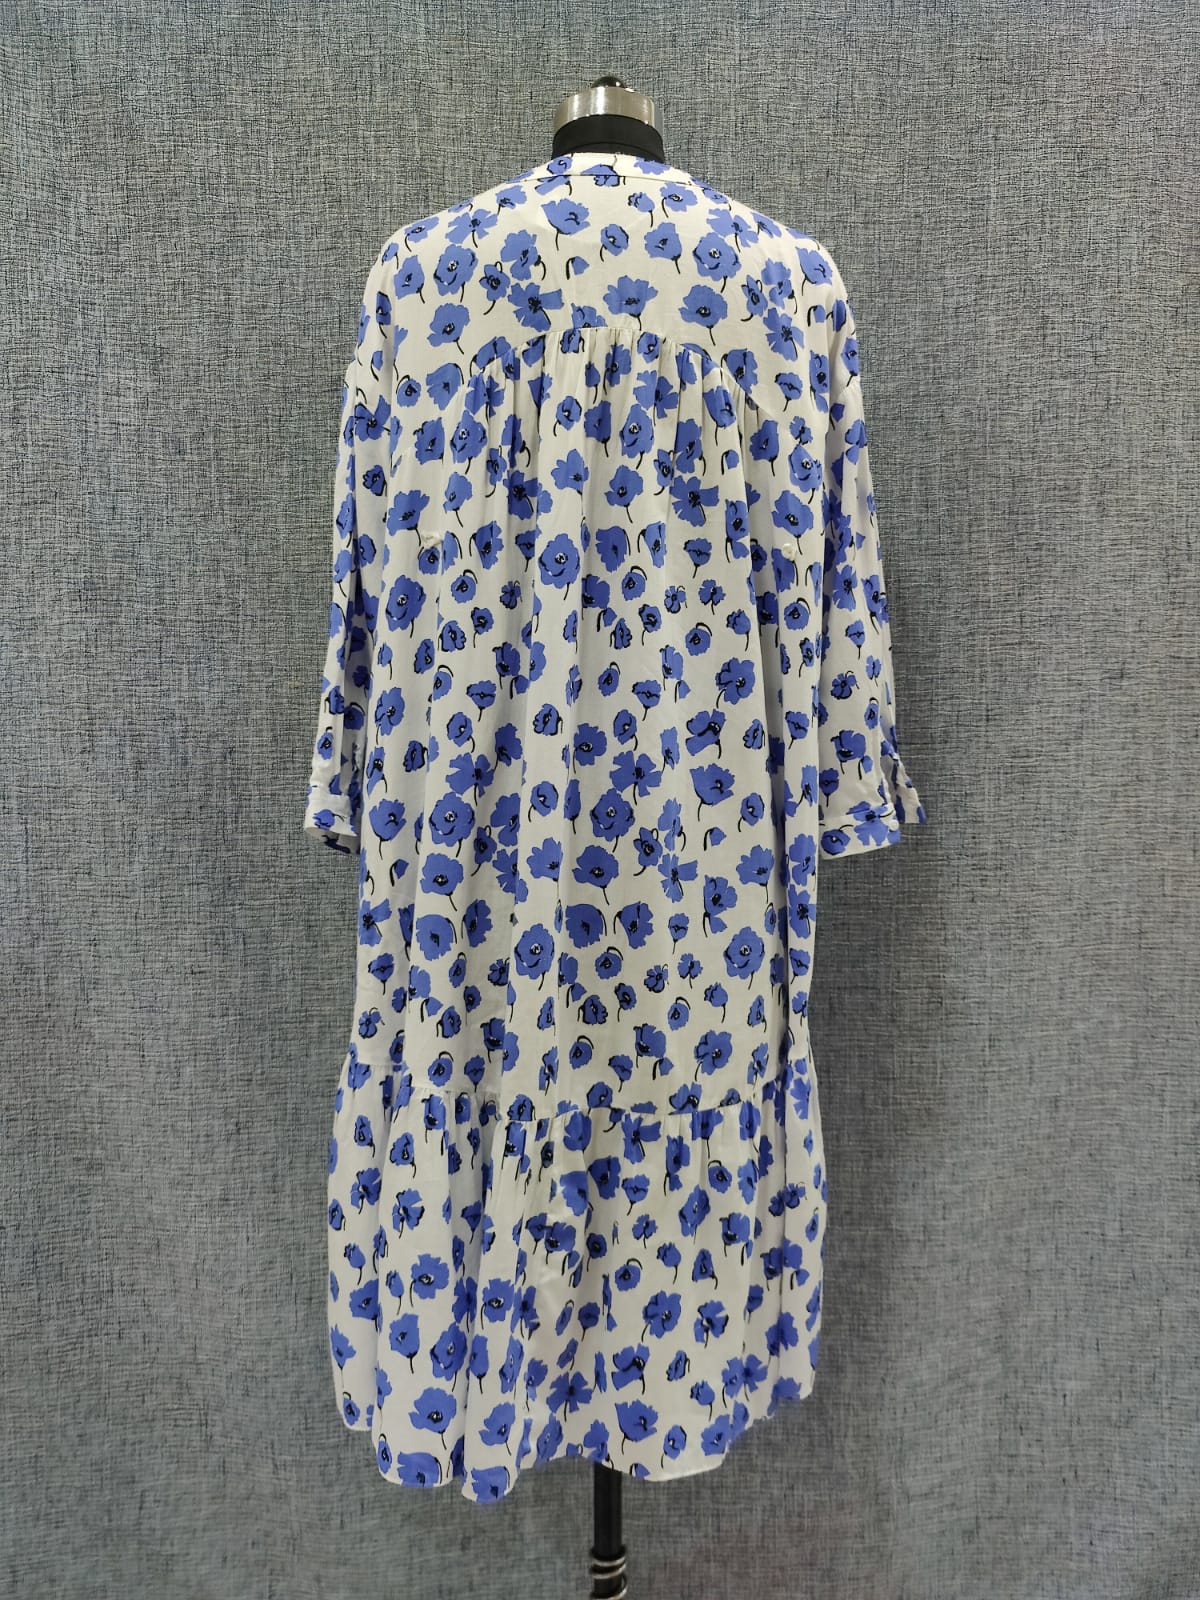 ZARA White and Blue Floral Dress | Relove